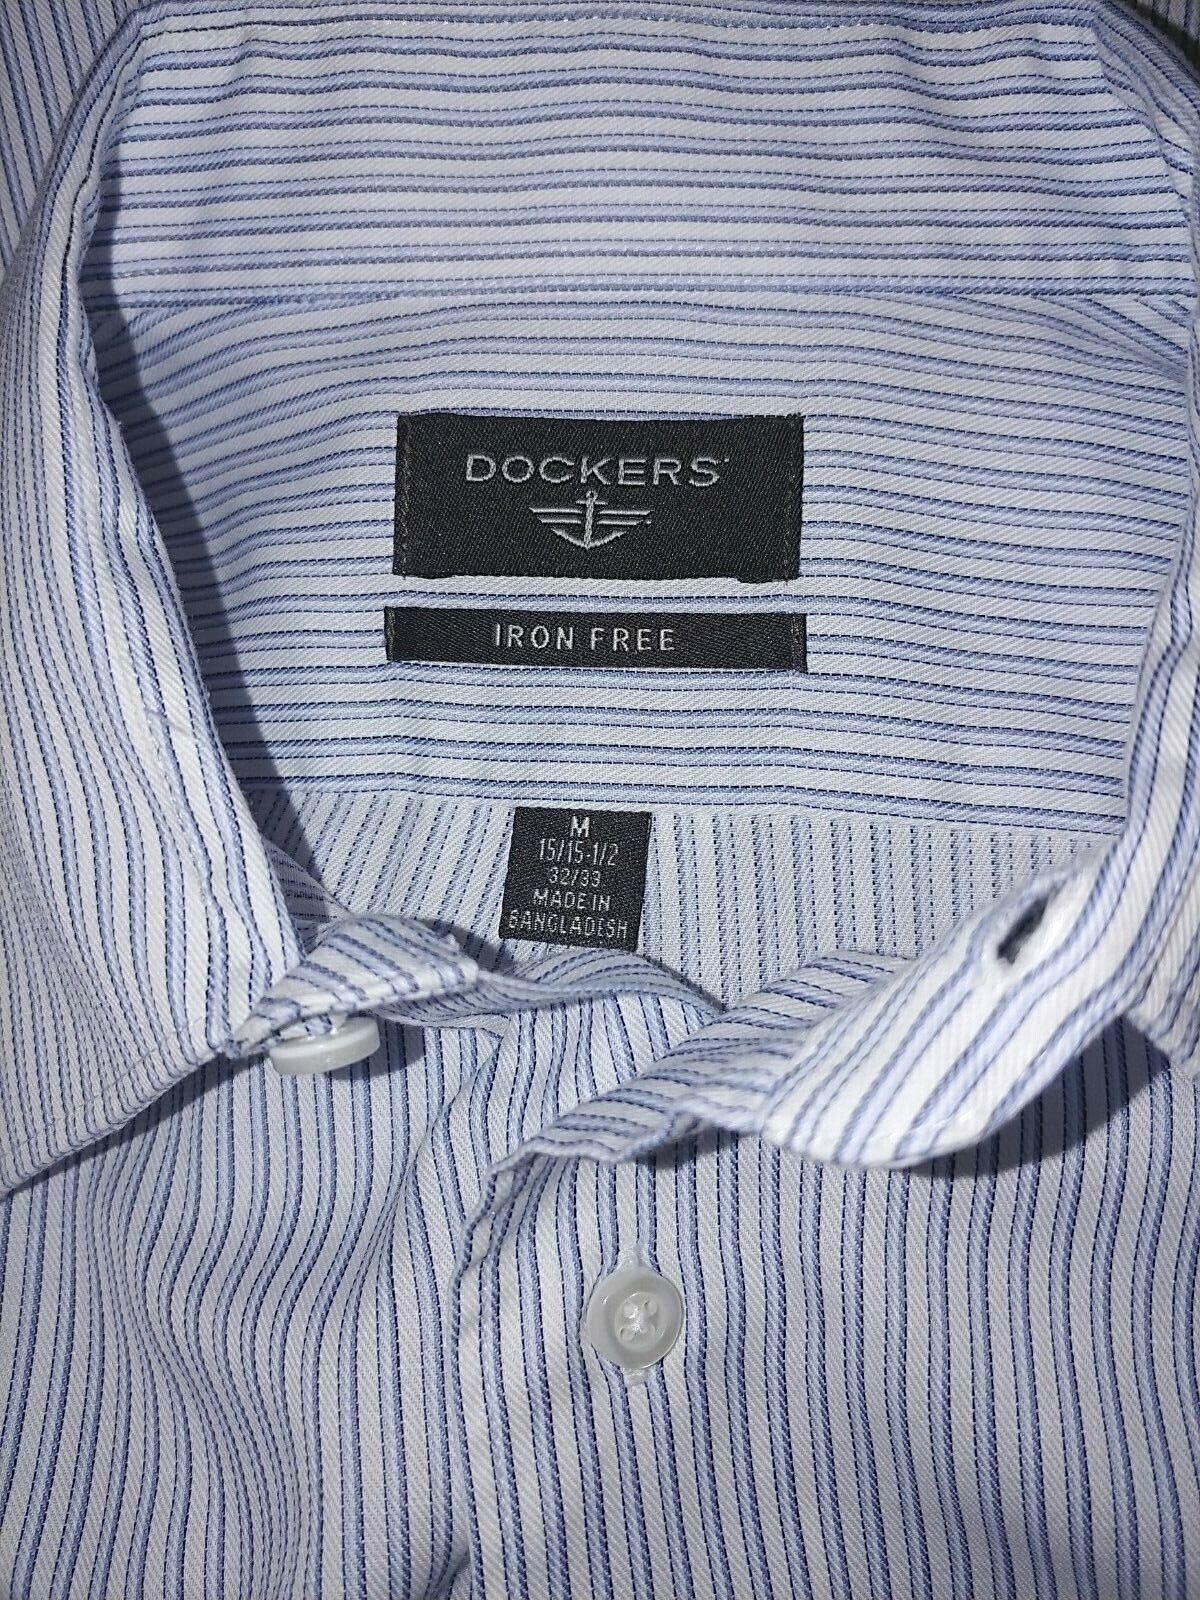 Primary image for DOCKERS MEN'S LS IRON FREE BLUE/WHITE STRIPED DRESS SHIRT-M(15/15.5x32/33)-NWOT